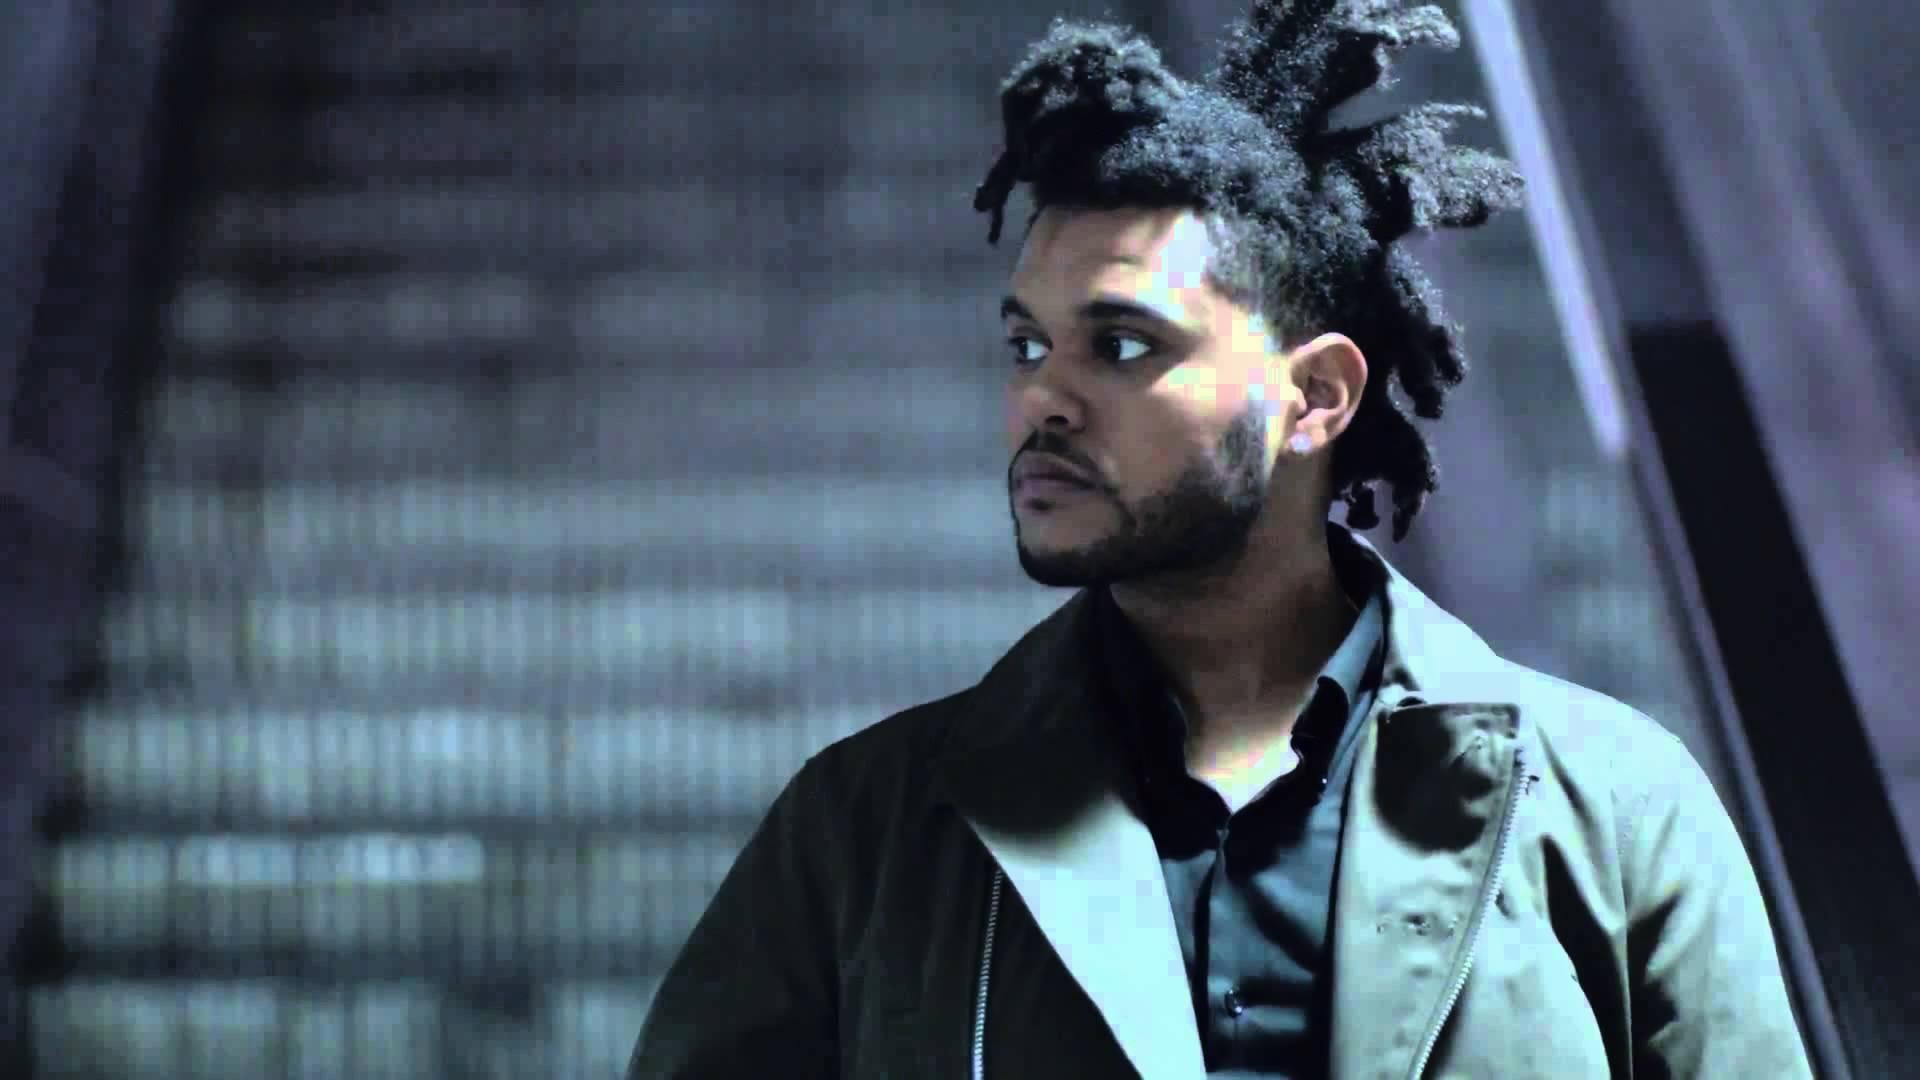 1920x1080 I believe he is very good and lives up to that fame. Here are some awesome the  weeknd wallpaper for your desktop!